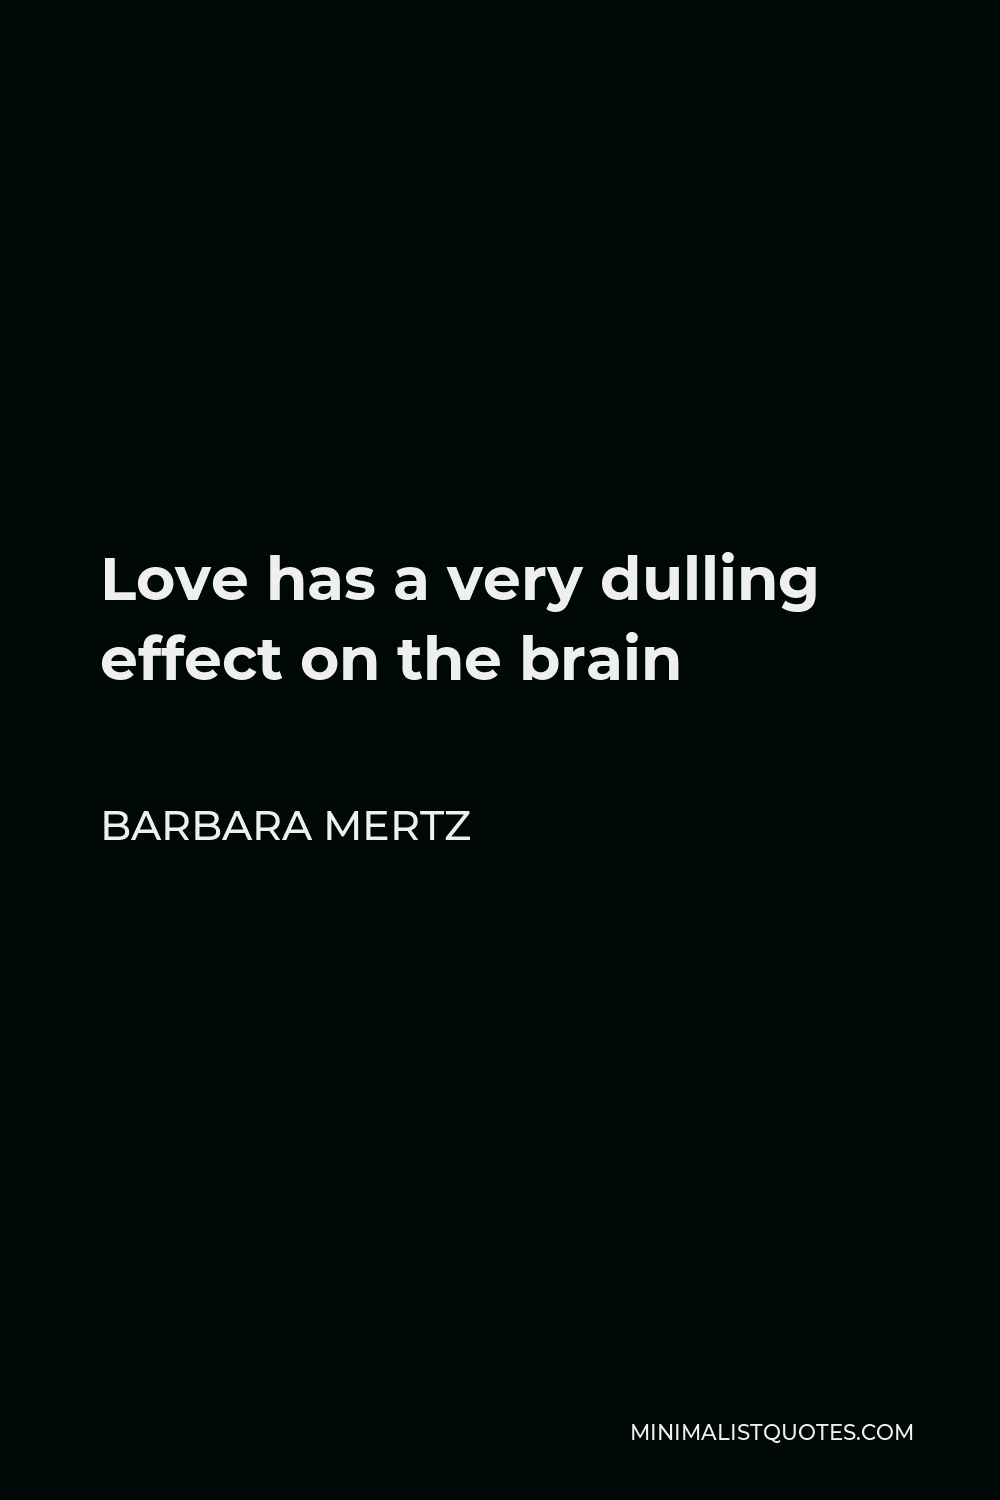 Barbara Mertz Quote - Love has a very dulling effect on the brain